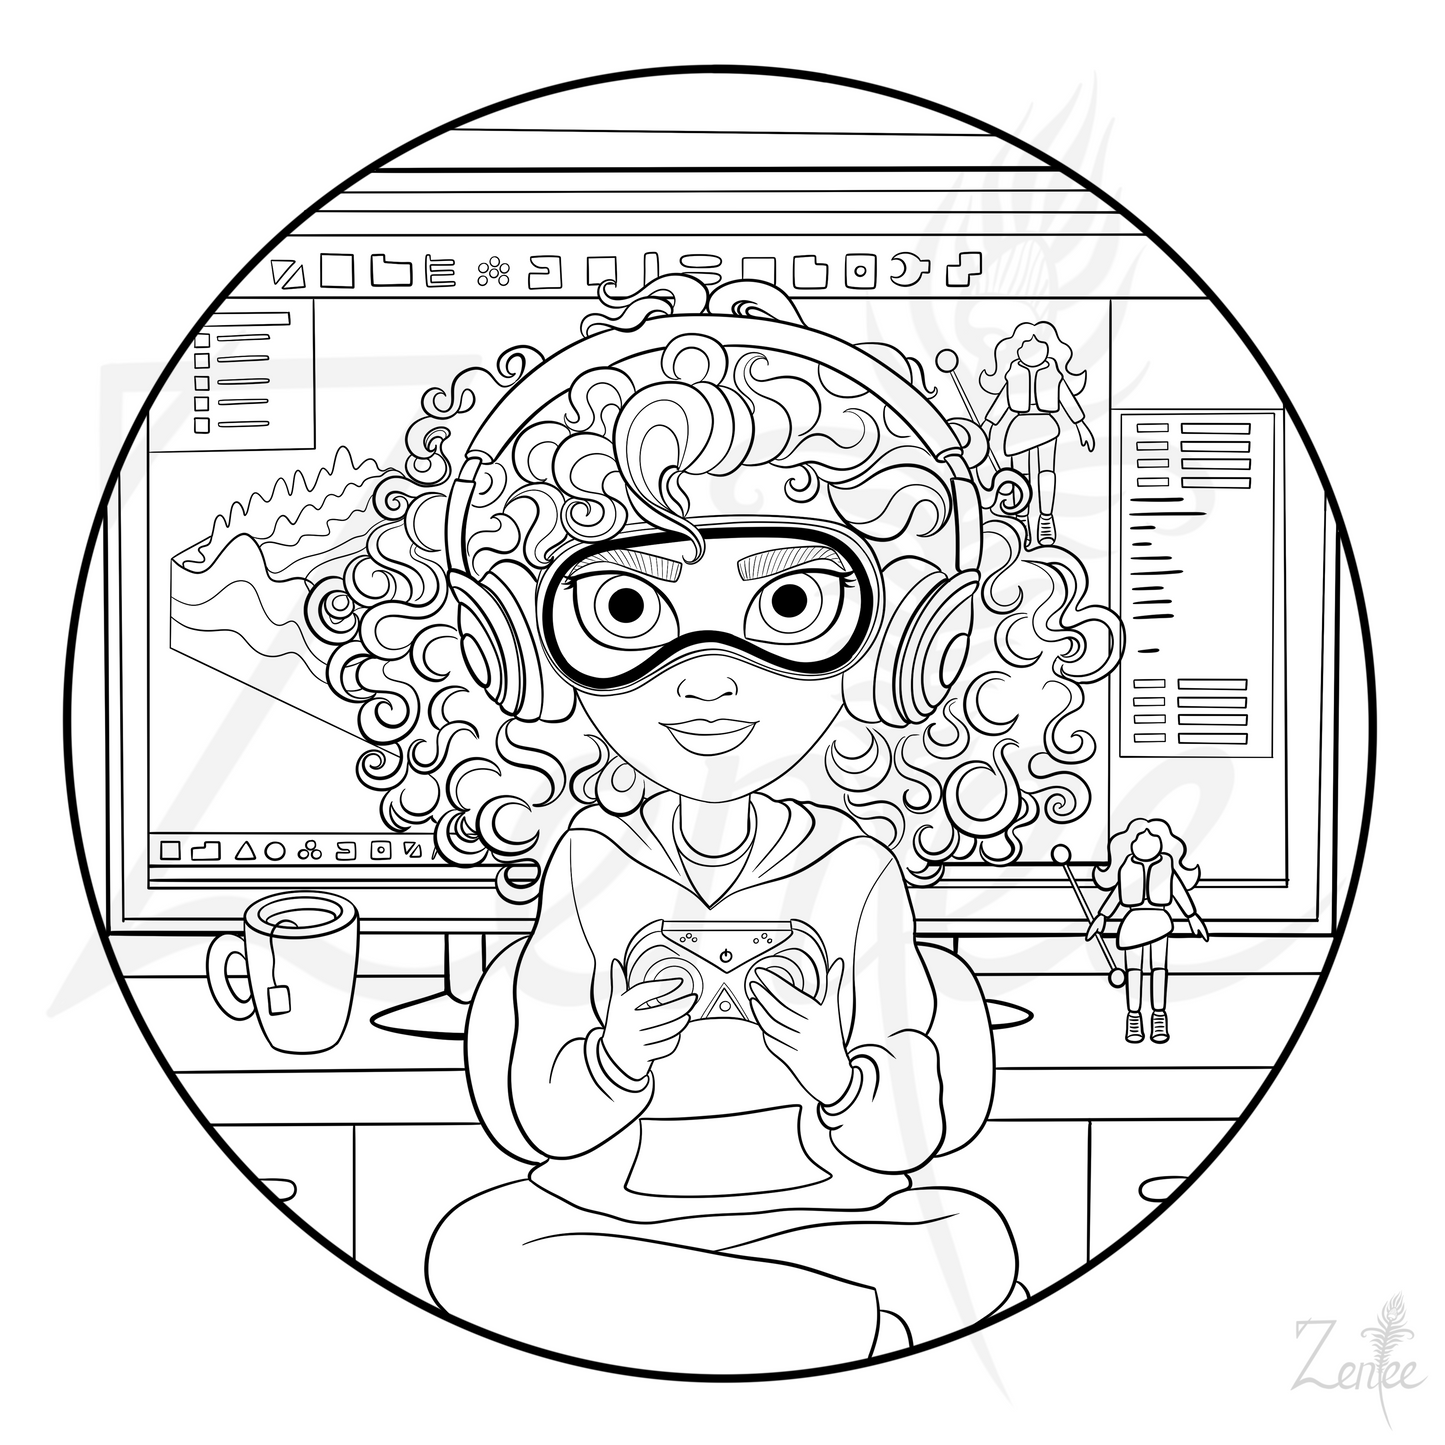 Alphabet Book: Gauri the Game Developer - Coloring Page